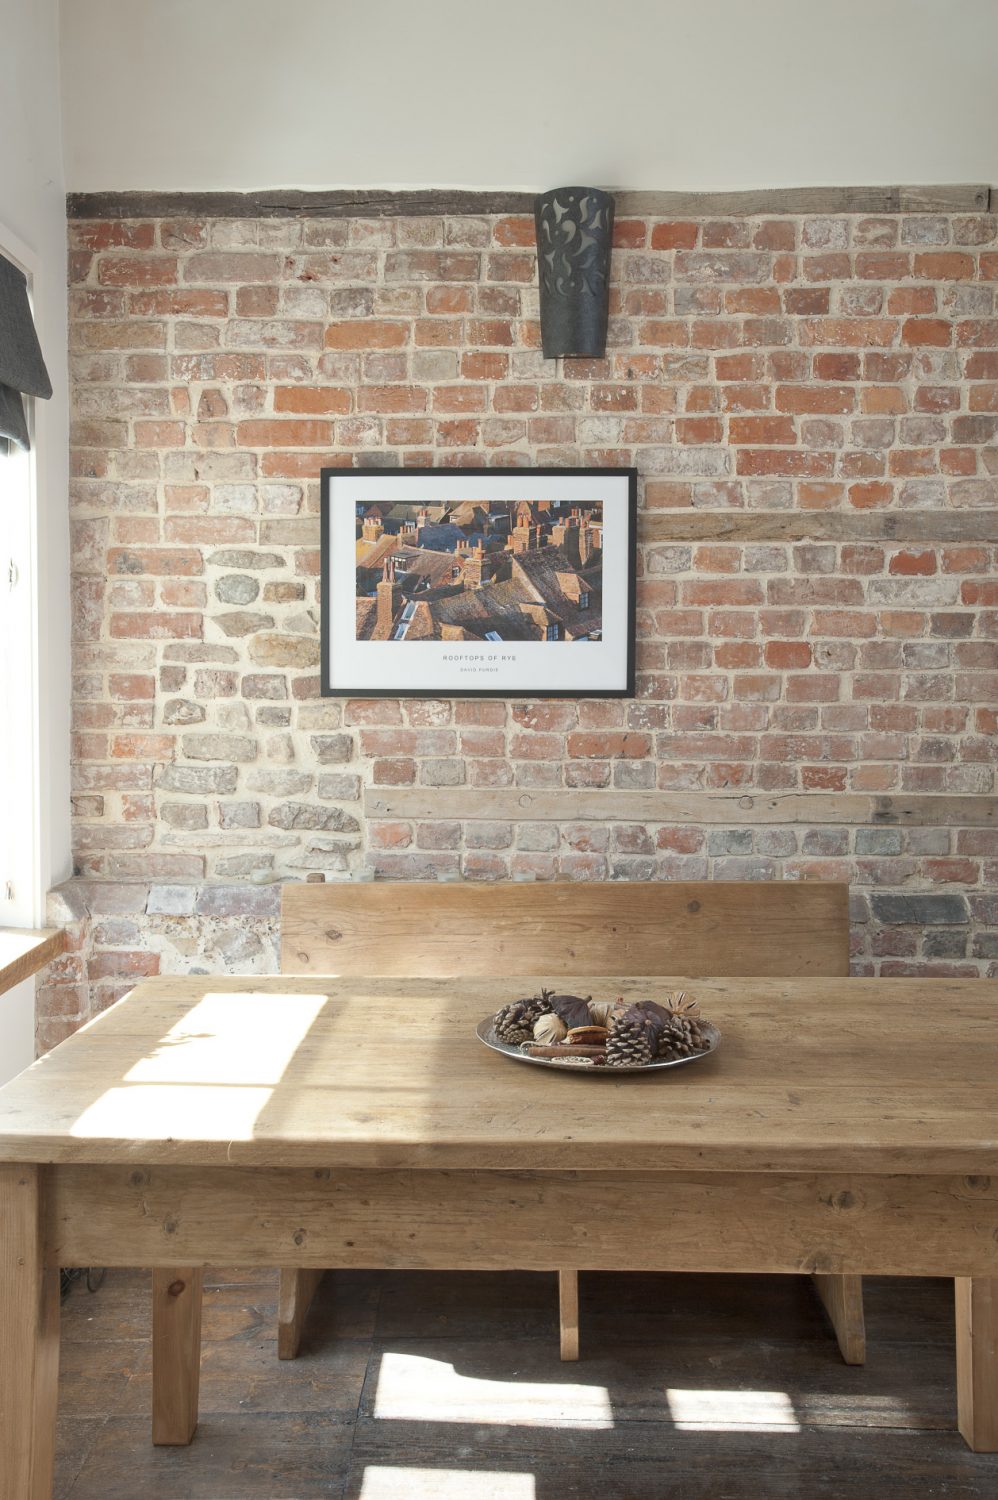 In one corner of the reception room stands a long scrubbed pine refectory table unadorned apart from a bowl of fragrant pine cones and cinnamon sticks. Set against the bare brick wall, it has an honest simplicity.